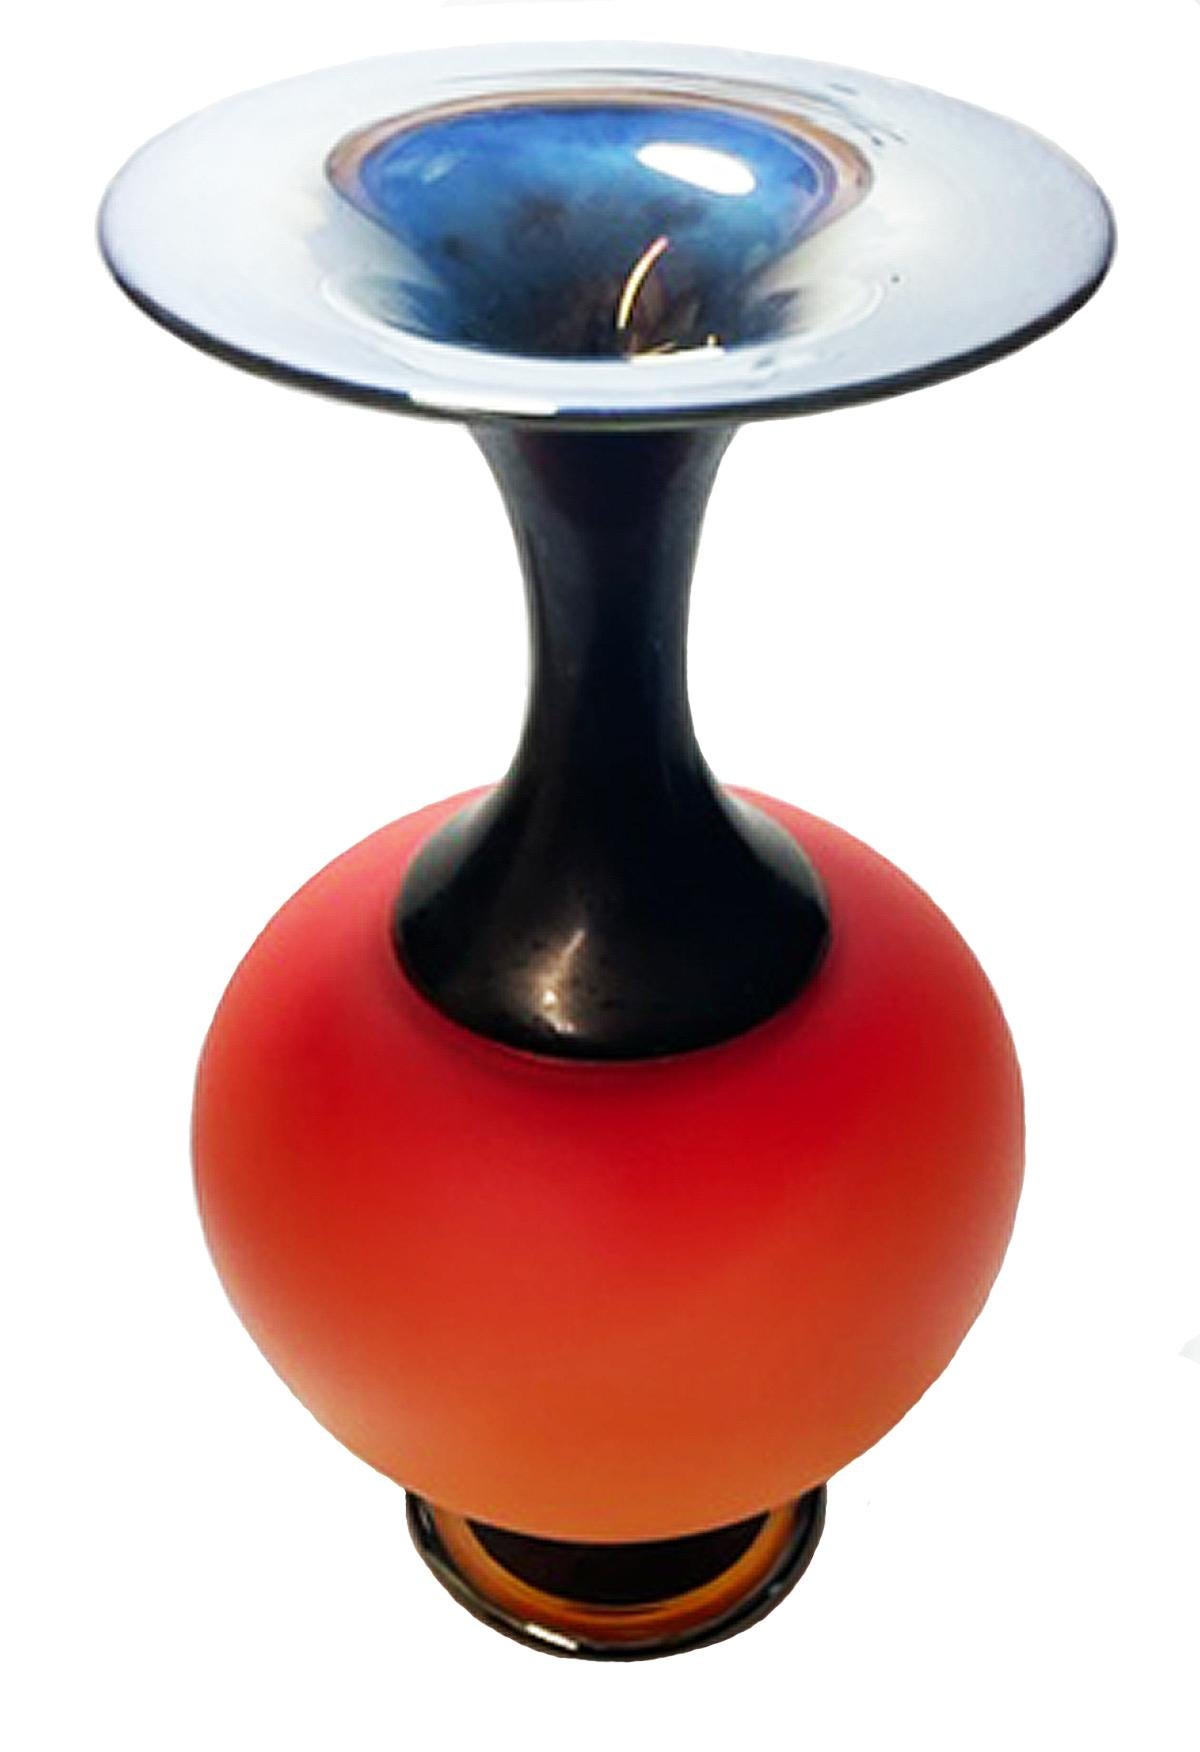 This piece is overlay blown and sandblast etched glass. It is part of a series of pieces sold in the artfair market. The blank vessel is blown with color layers and a lustered, folded rim glass foot. The last exterior layer is black which in this